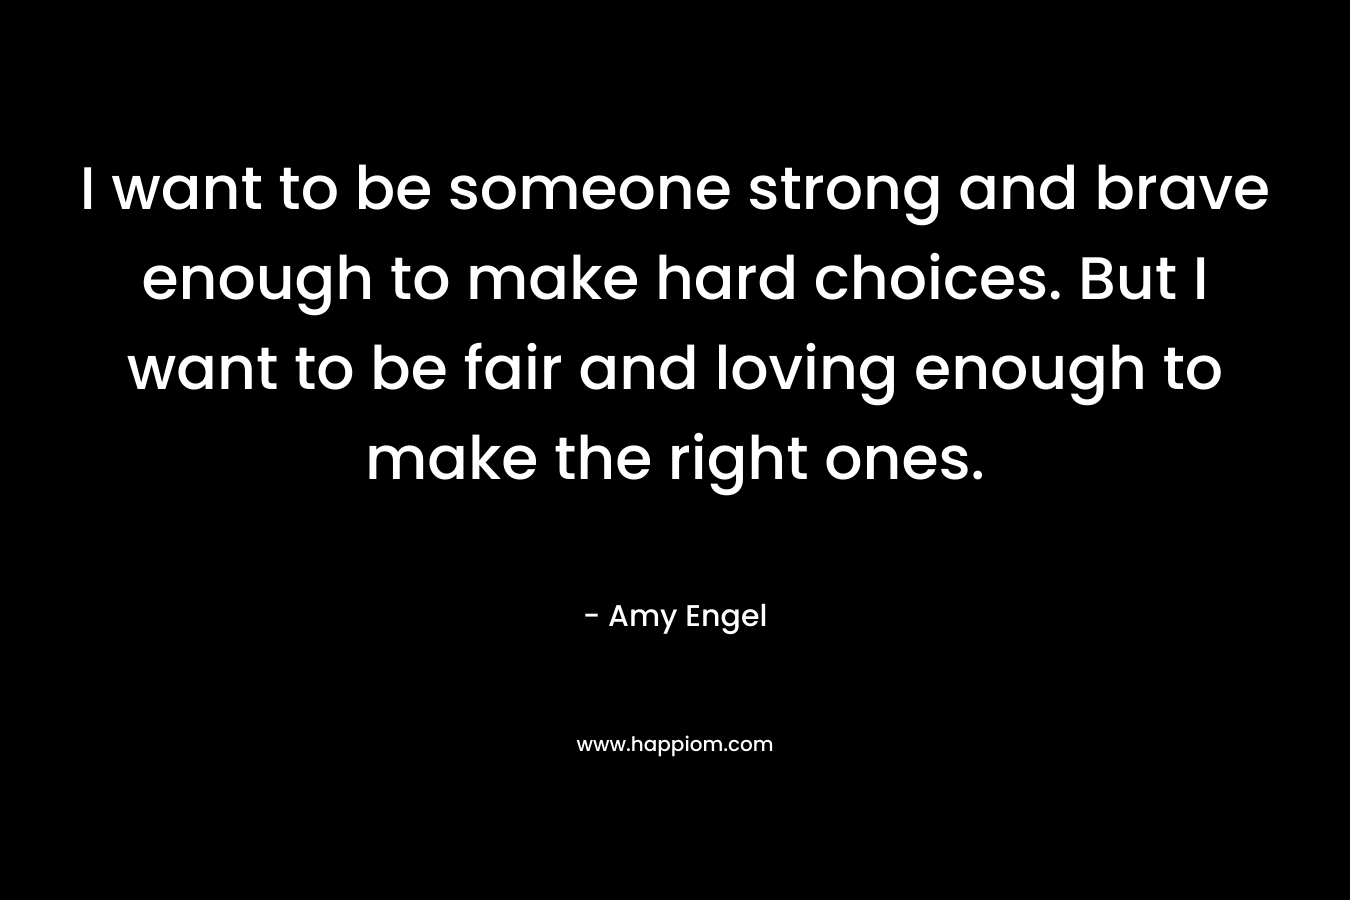 I want to be someone strong and brave enough to make hard choices. But I want to be fair and loving enough to make the right ones. – Amy Engel